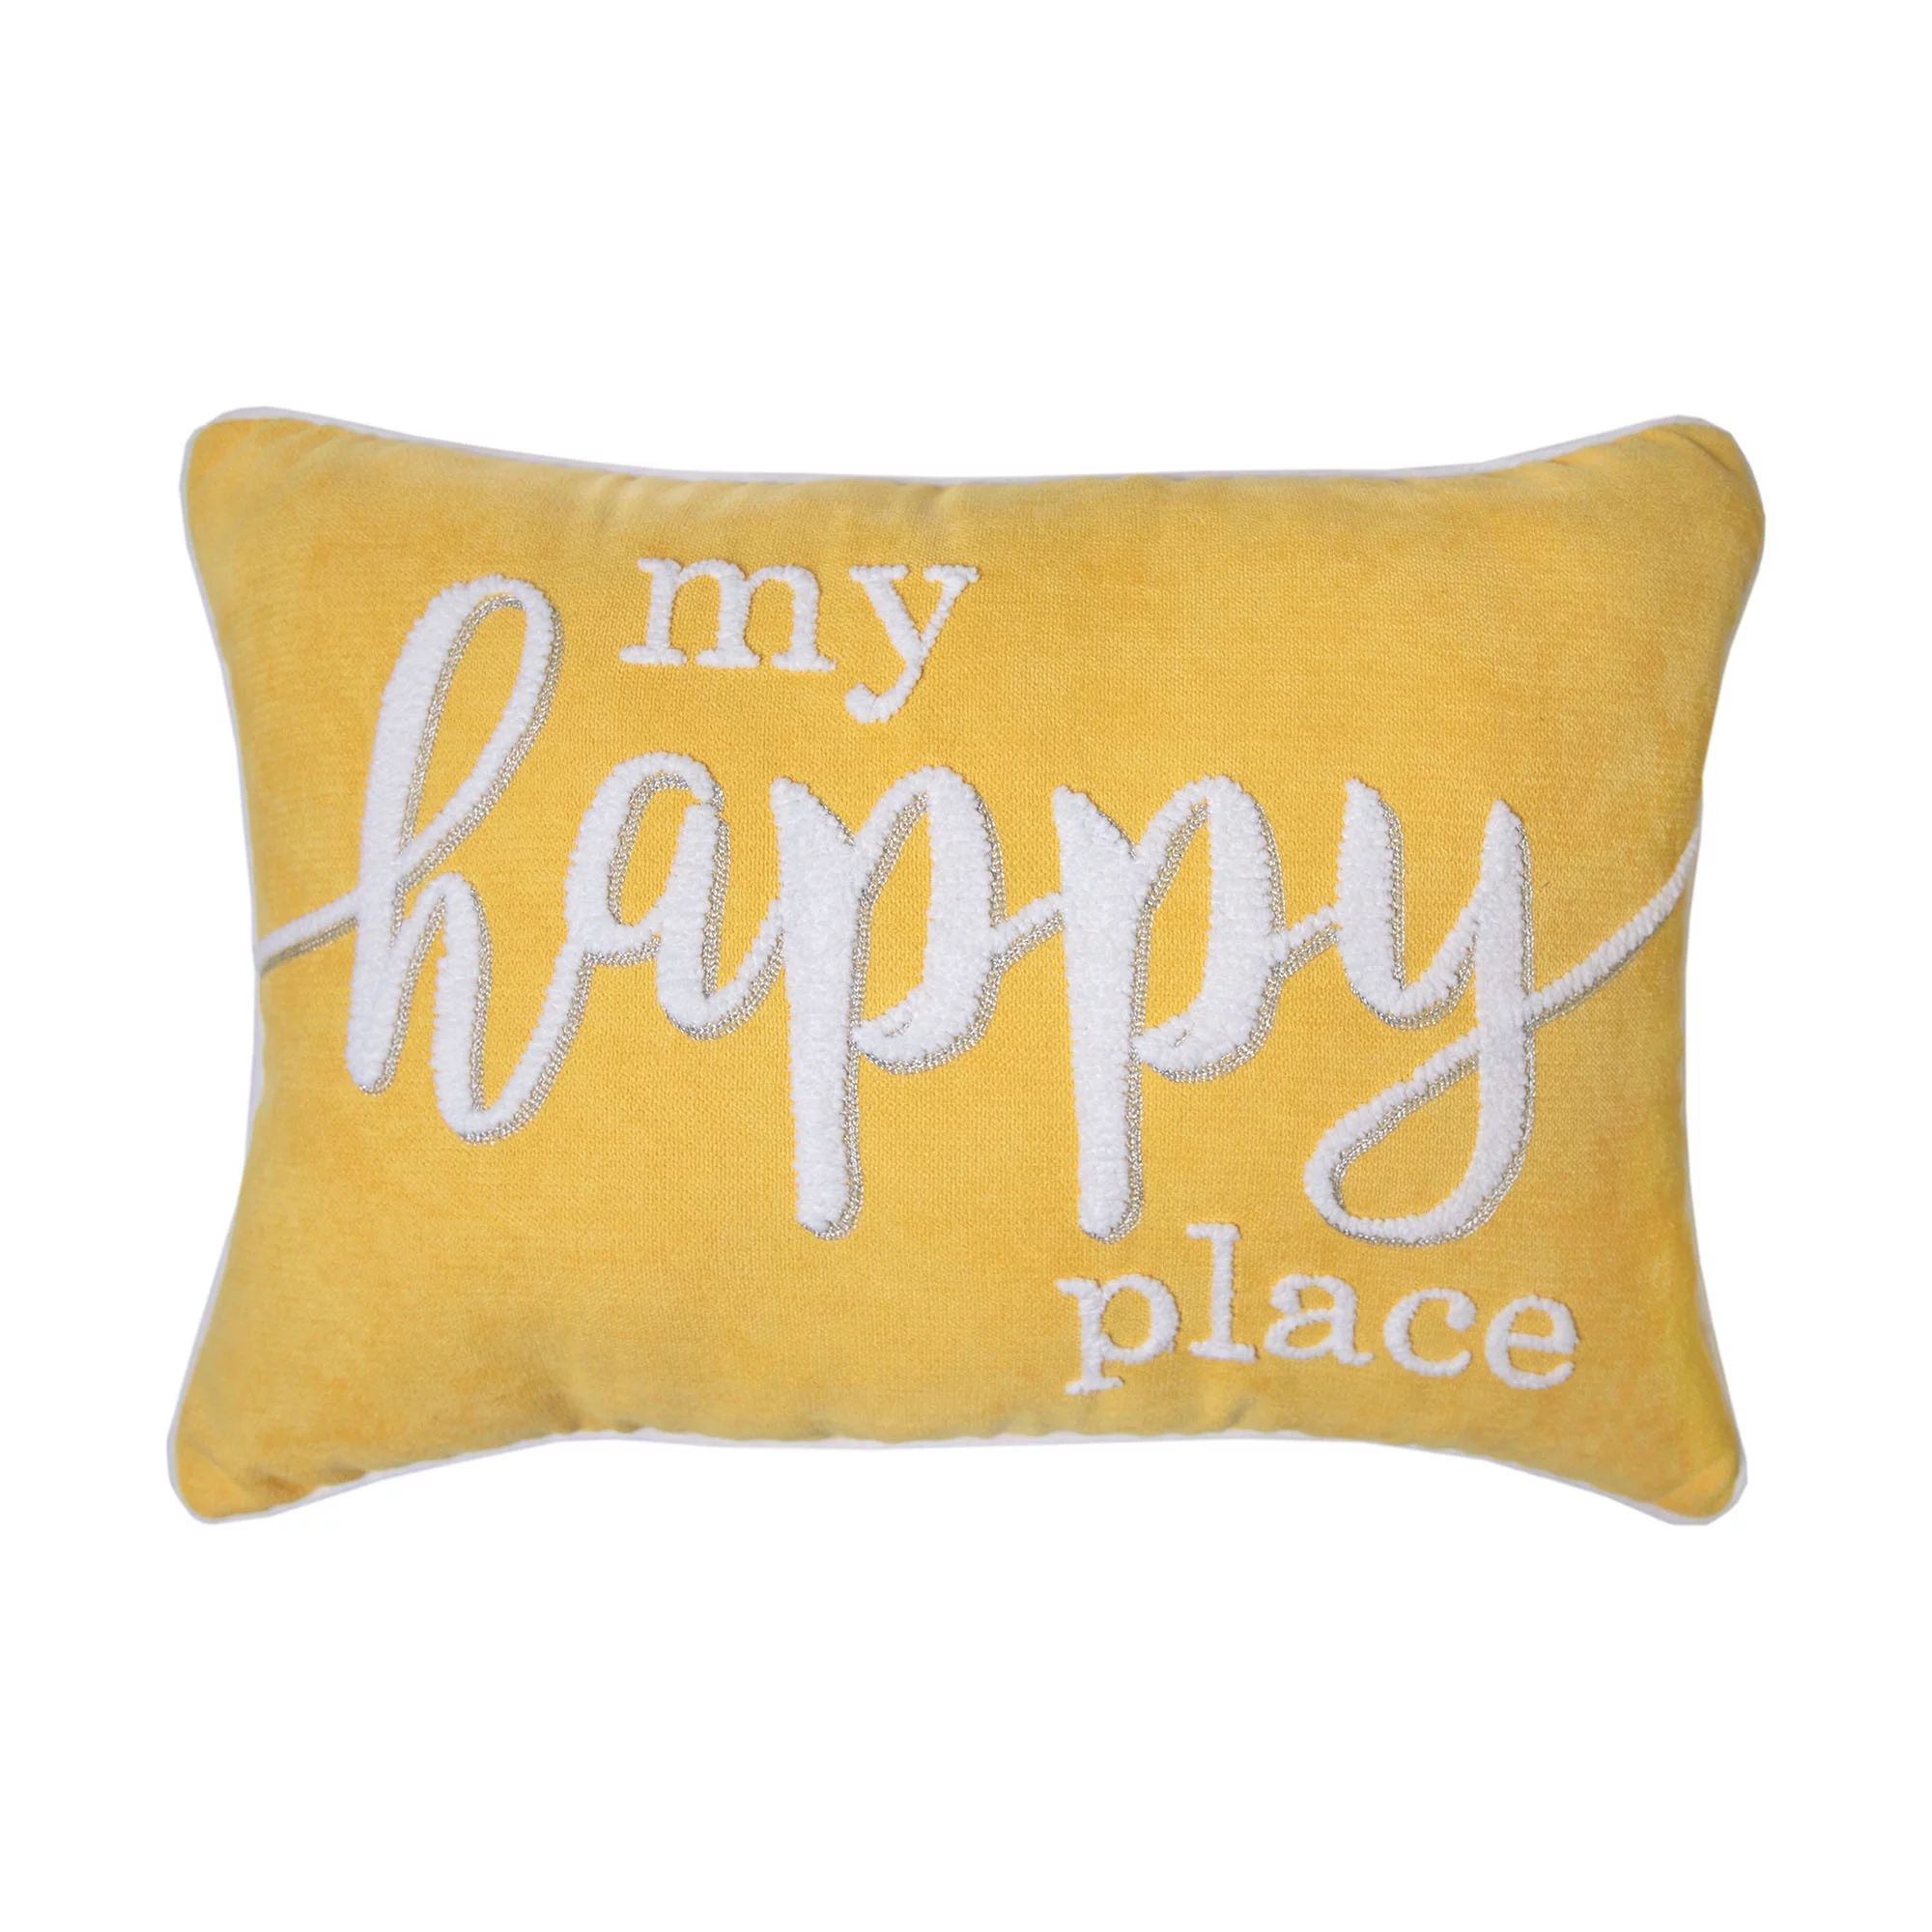 Better Homes & Gardens Decorative Throw Pillow, My Happy Place, Oblong, Yellow, 14" x 20", 1Pack | Walmart (US)